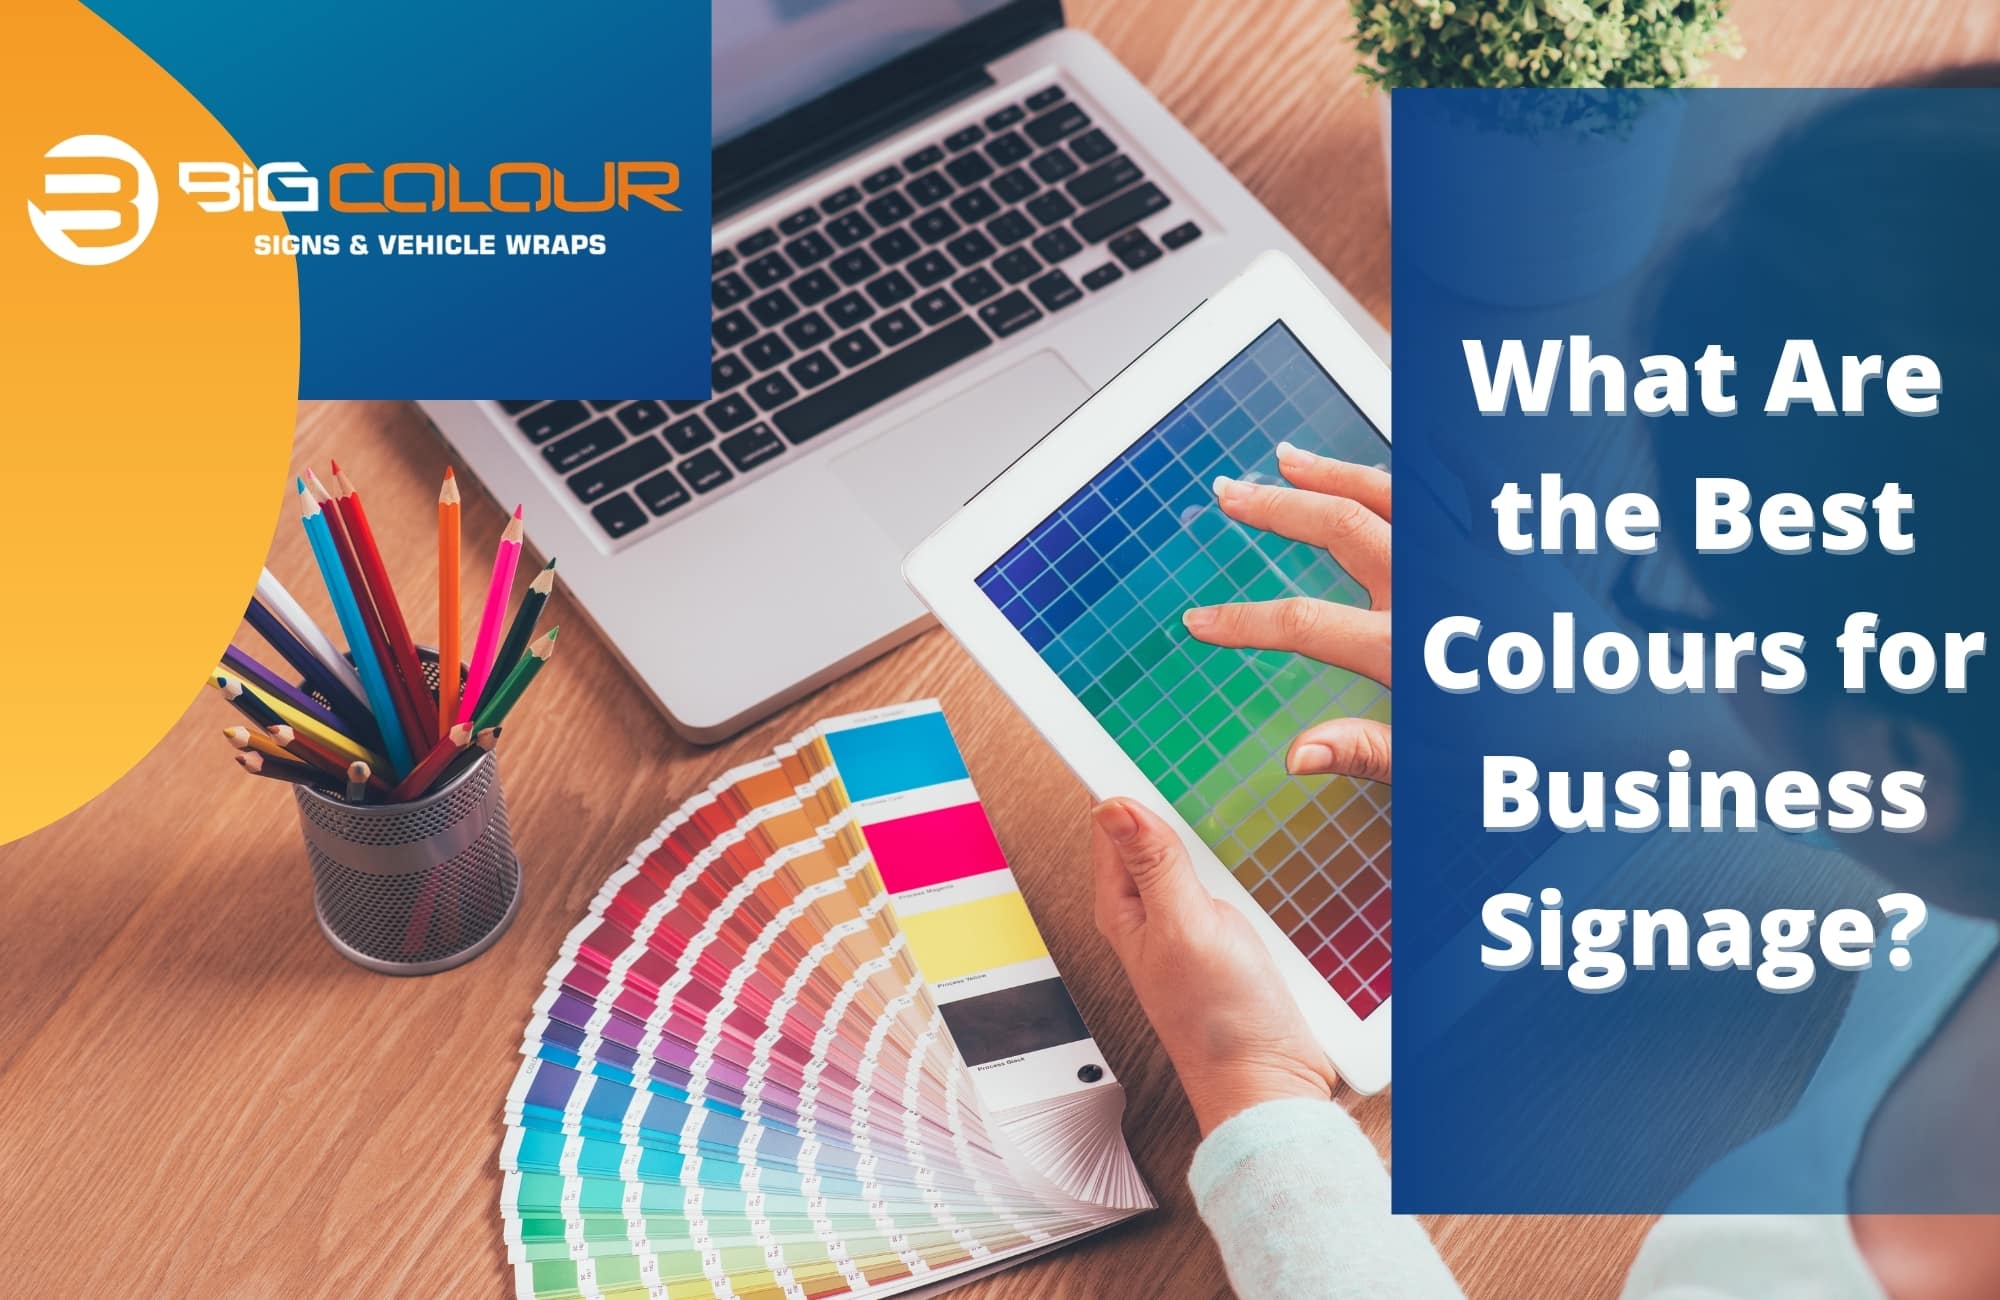 What Are the Best Colours for Business Signage?